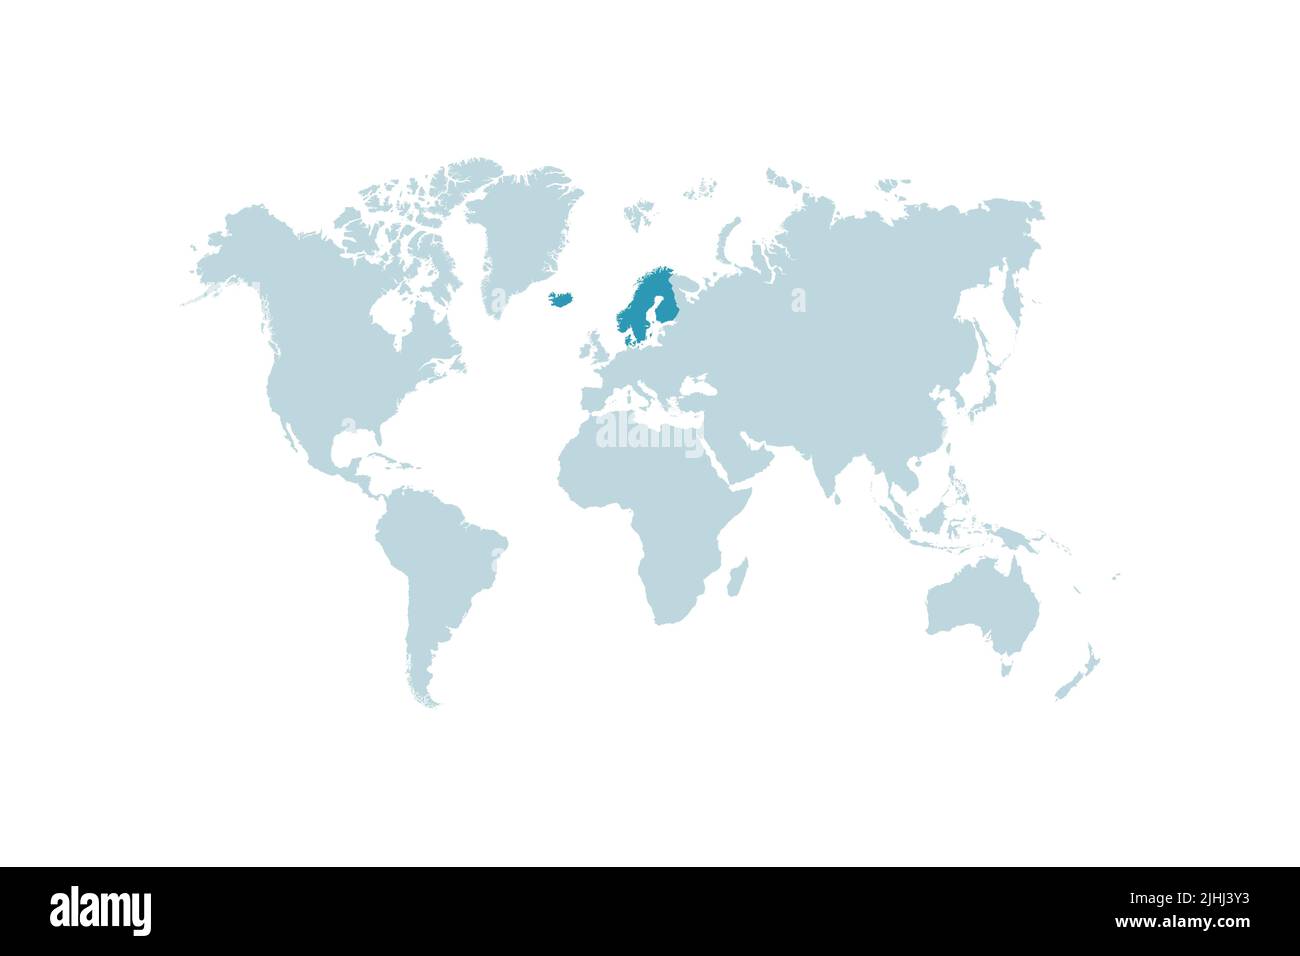 Scandinavian countries on the world map, vector illustration Stock Vector